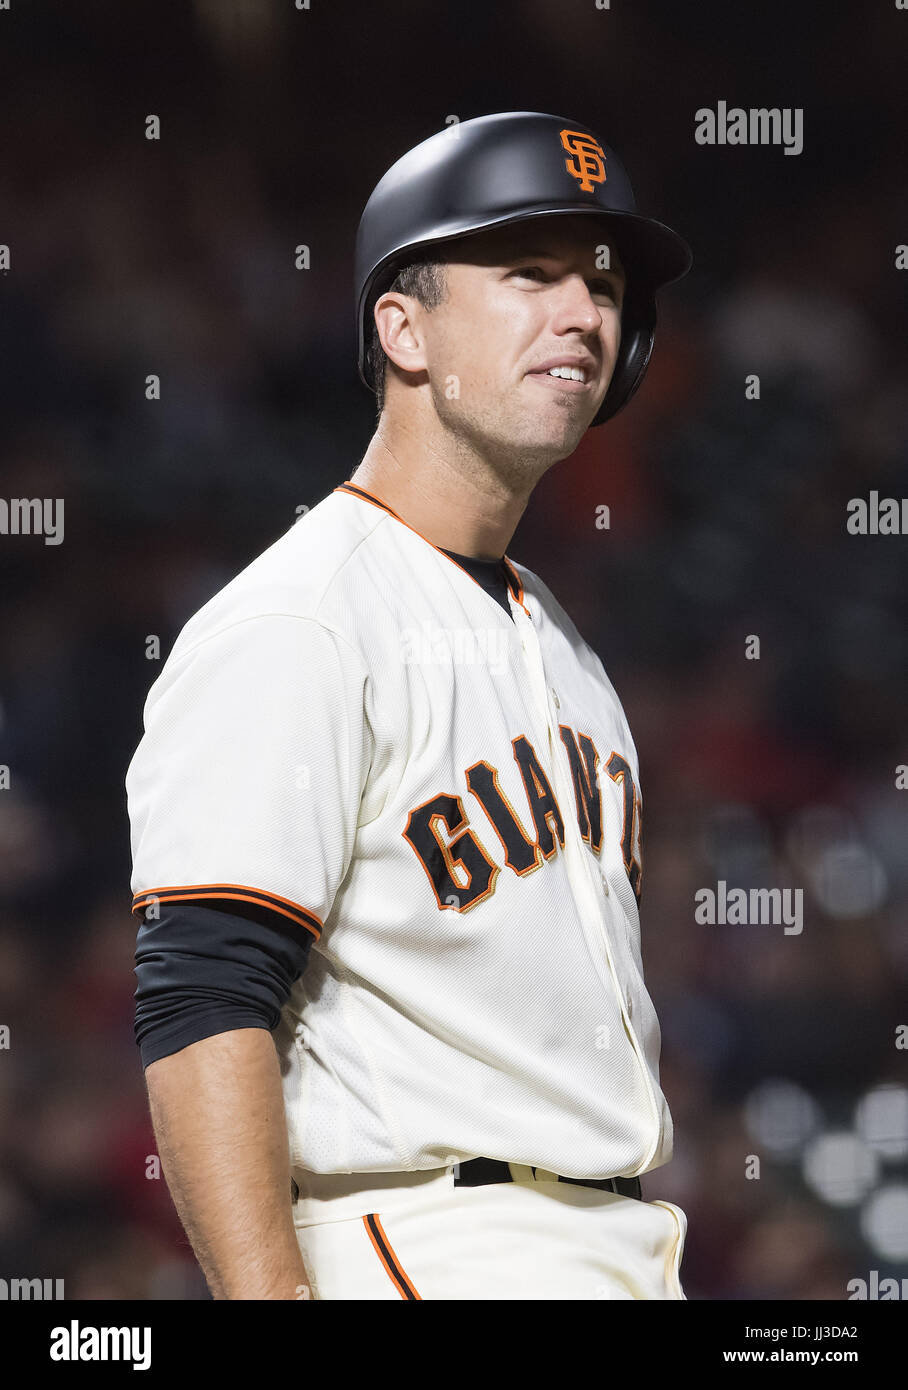 San Francisco, California, USA. 17th July, 2017. With two outs in the bottom of the ninth inning, San Francisco Giants catcher Buster Posey (28) watches his ball go foul, during a MLB baseball game between the Cleveland Indians and the San Francisco Giants at AT&T Park in San Francisco, California. Valerie Shoaps/CSM/Alamy Live News Stock Photo